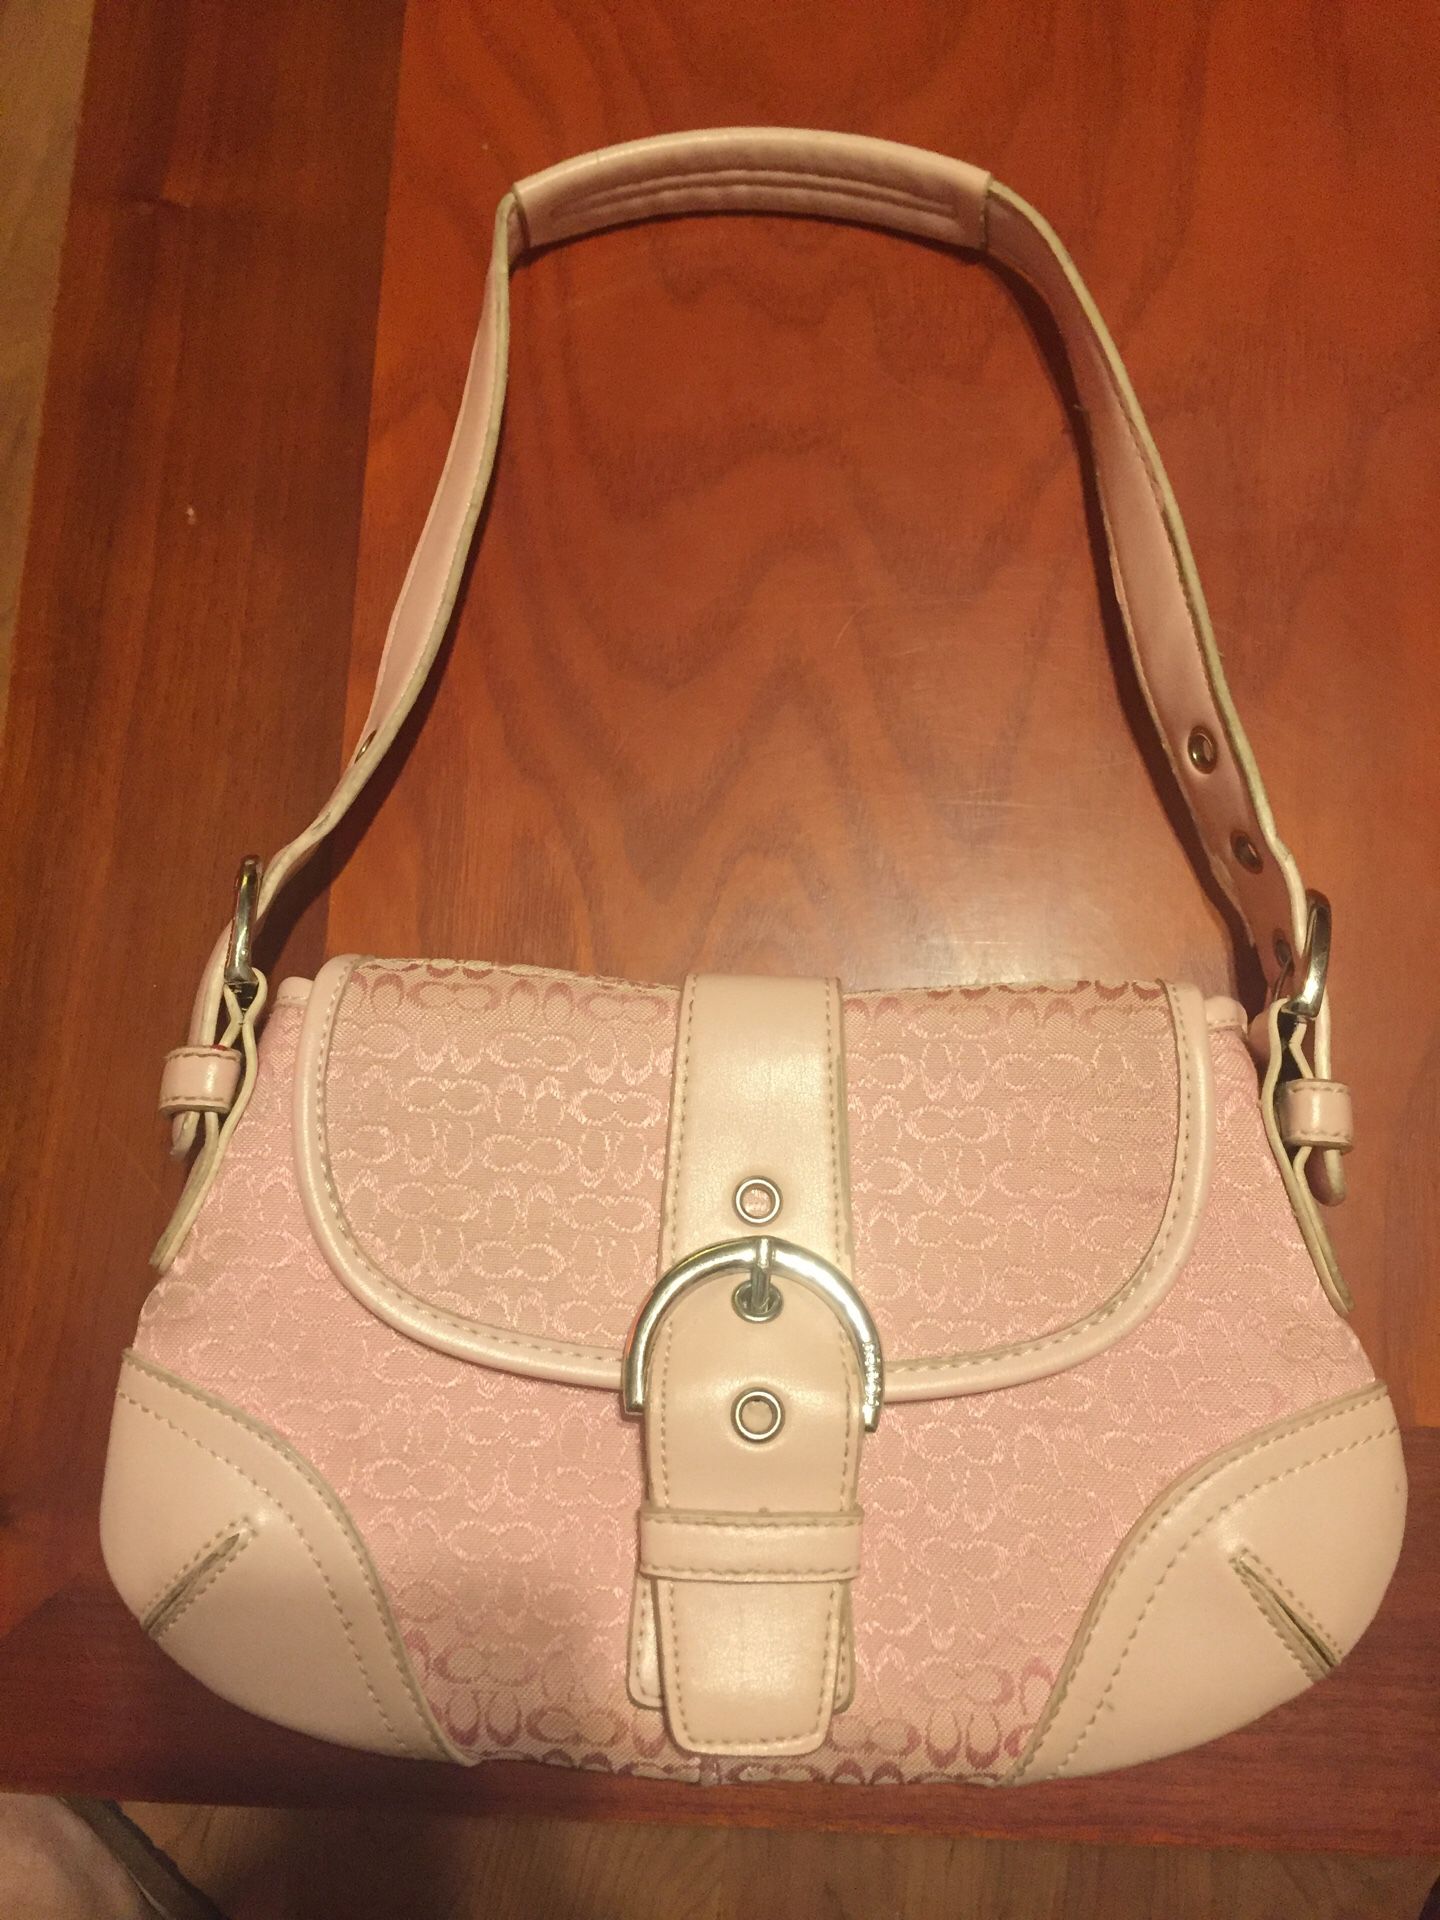 Small light pink coach purse. Used but good condition